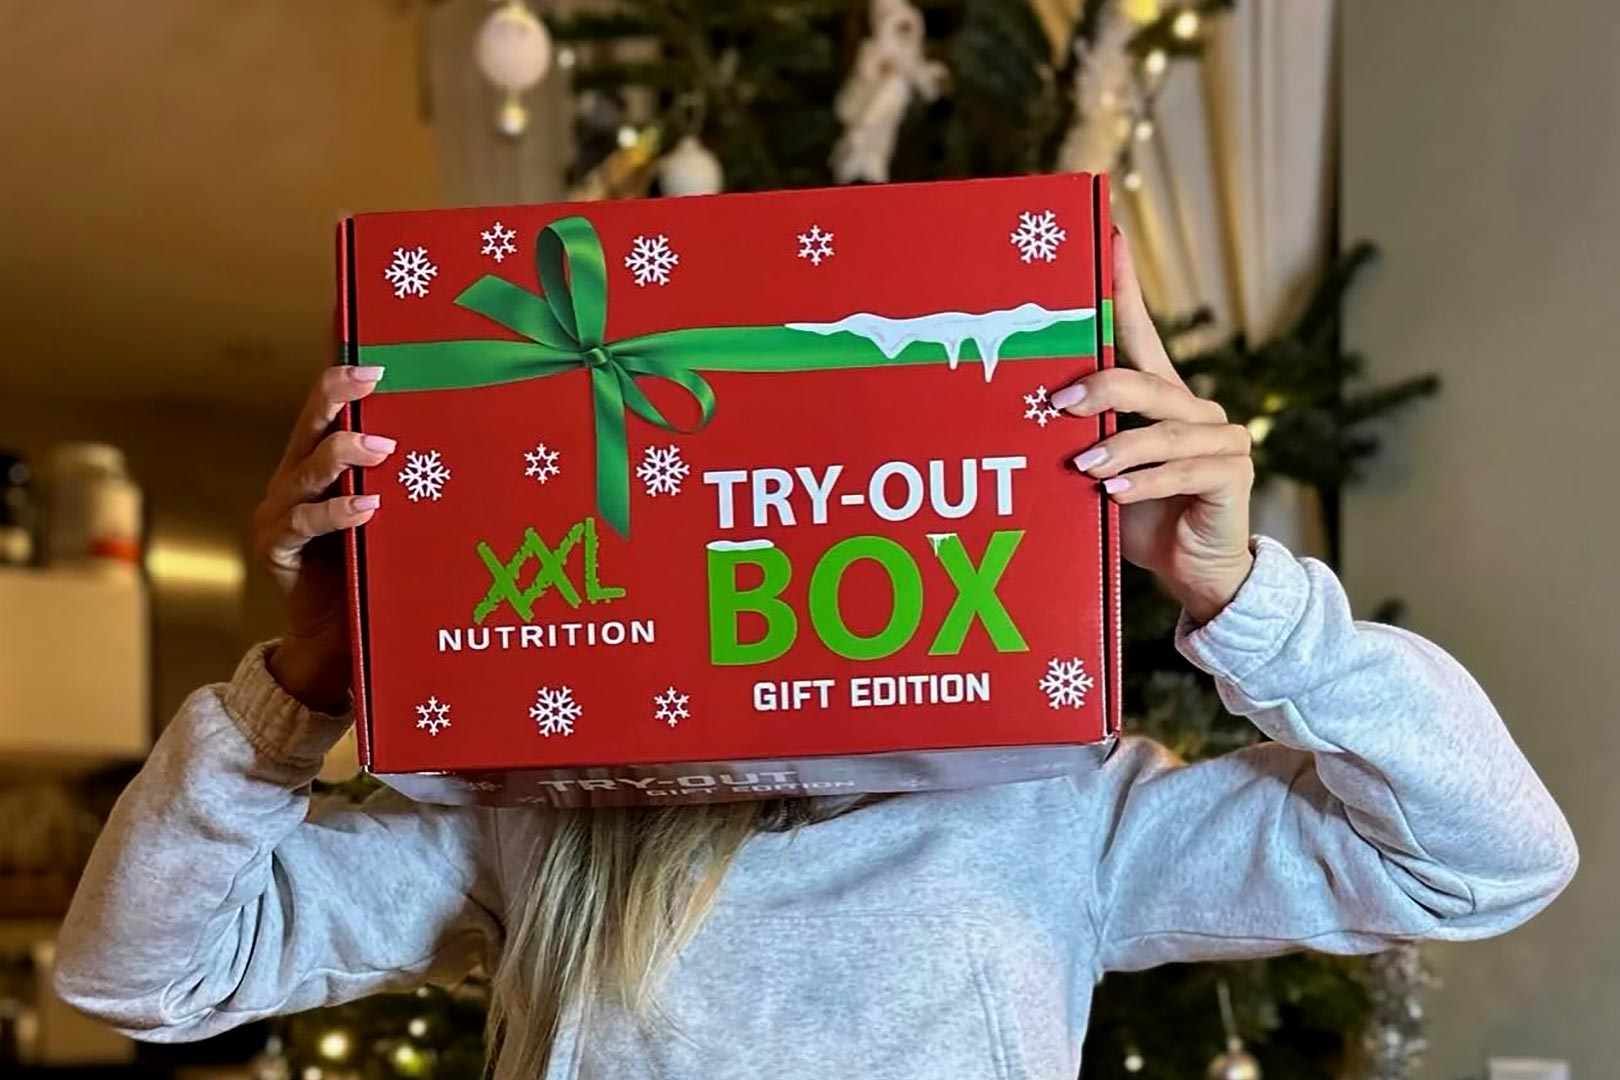 Xxl Nutrition Gift Edition Try Out Box